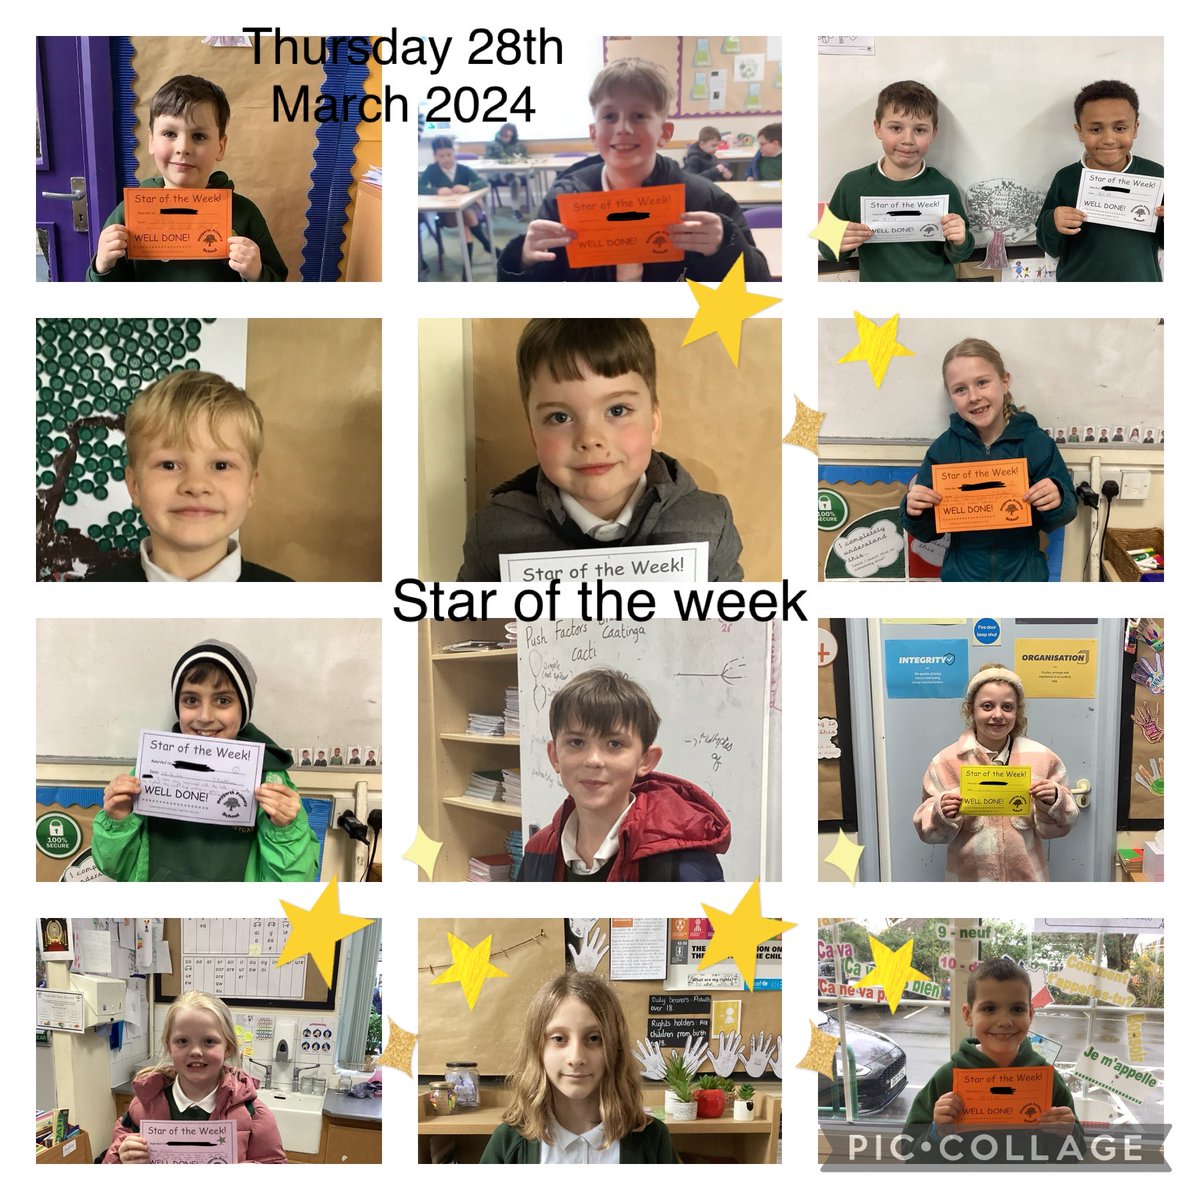 Congratulations to all our Stars of the Week! Wishing you all a restful Spring break 🌞